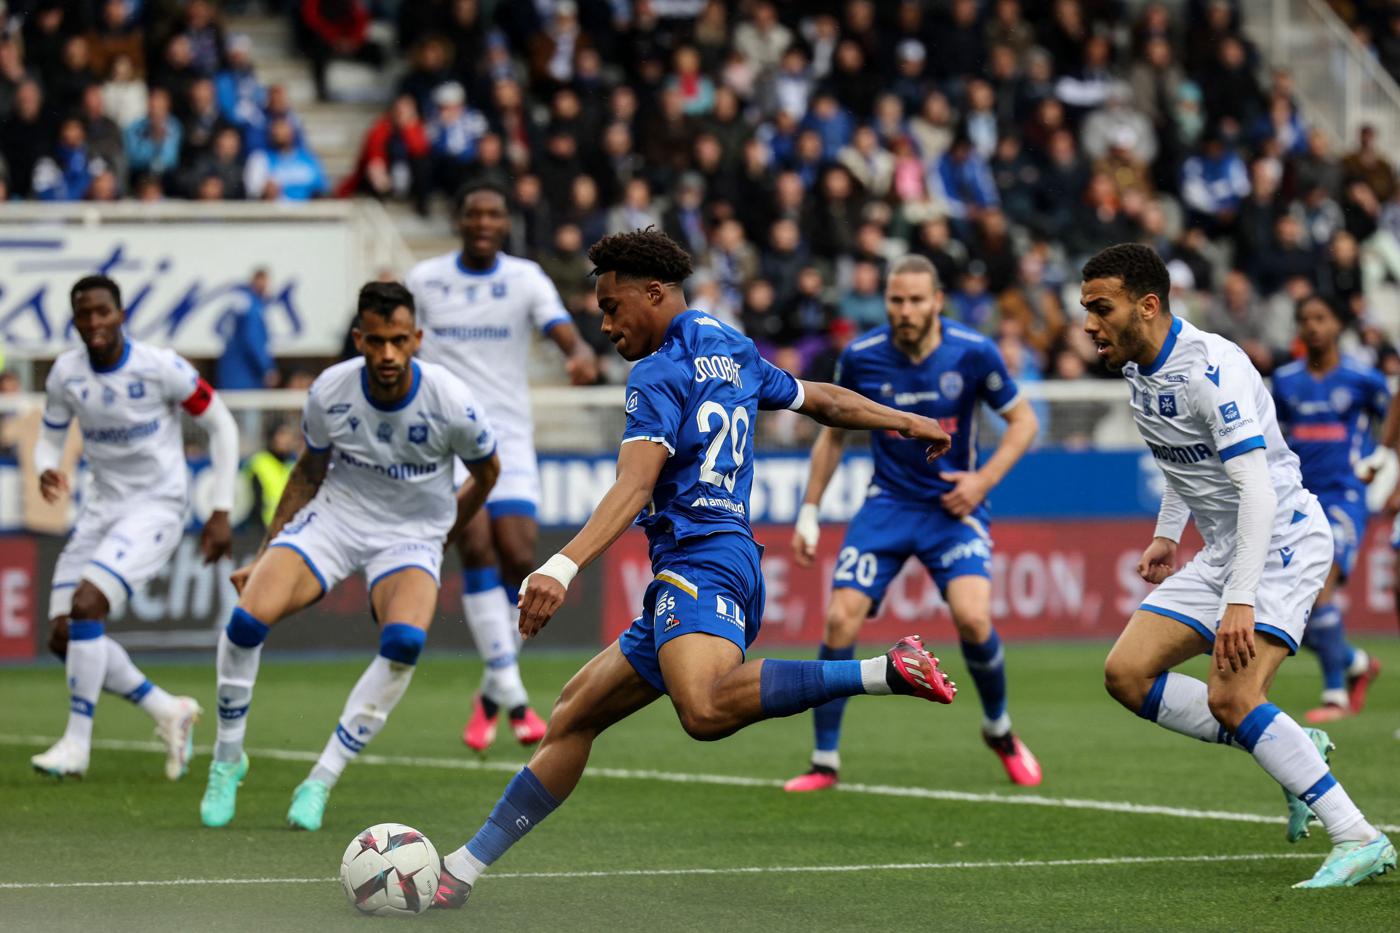 Auxerre - Troyes - 1:0. French Championship, 29th round. Match review, statistics